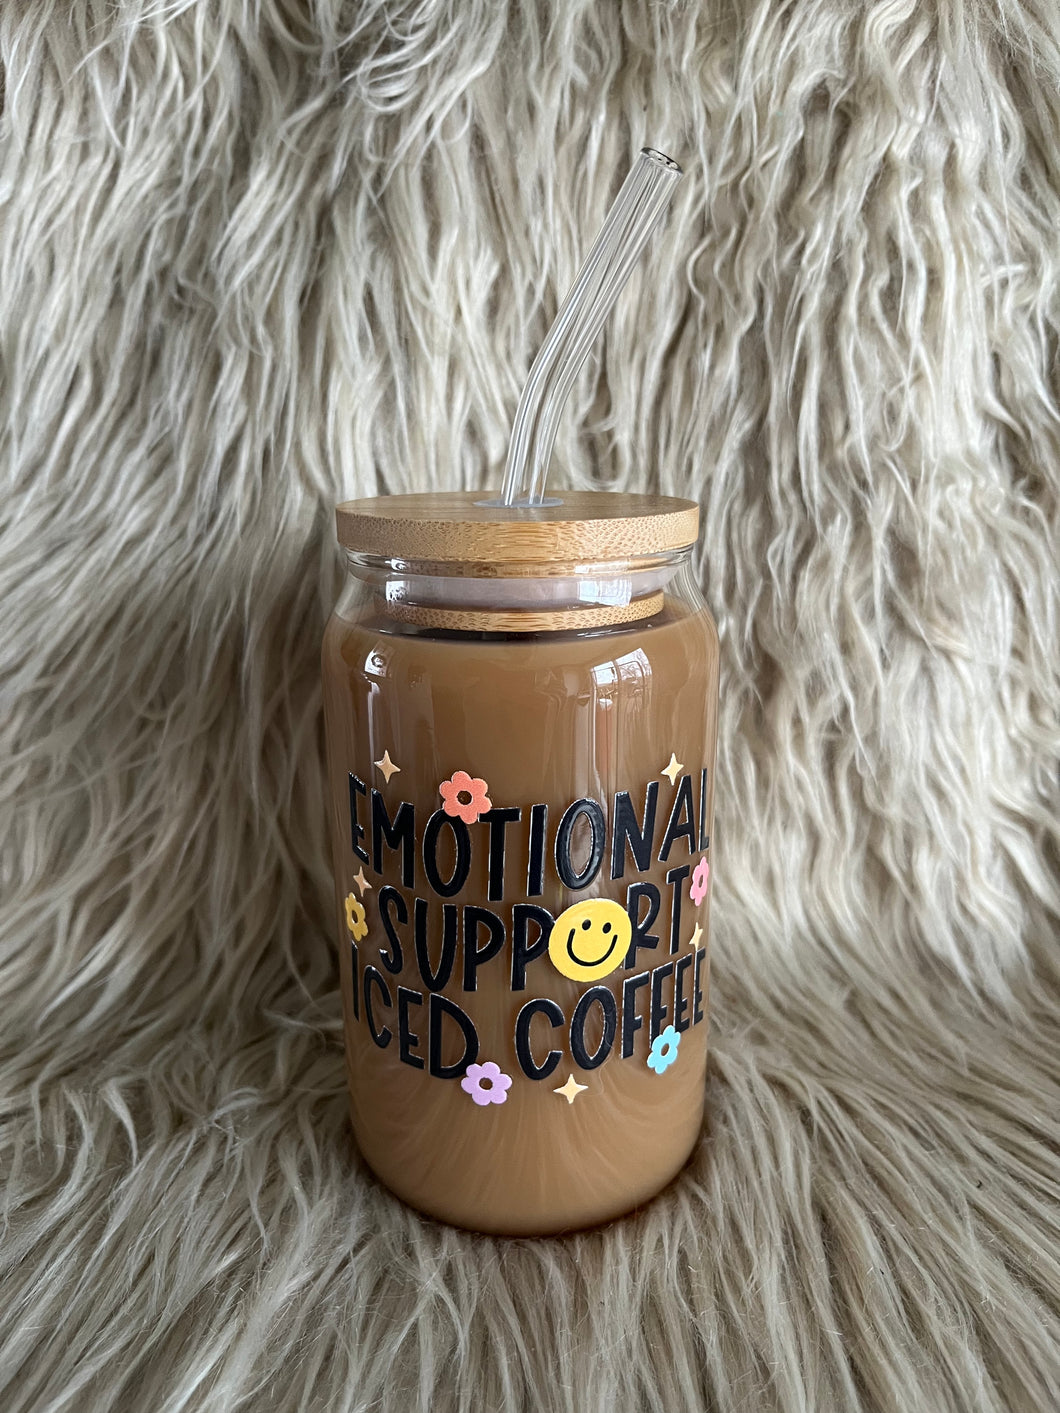 Emotional Support Iced Coffee